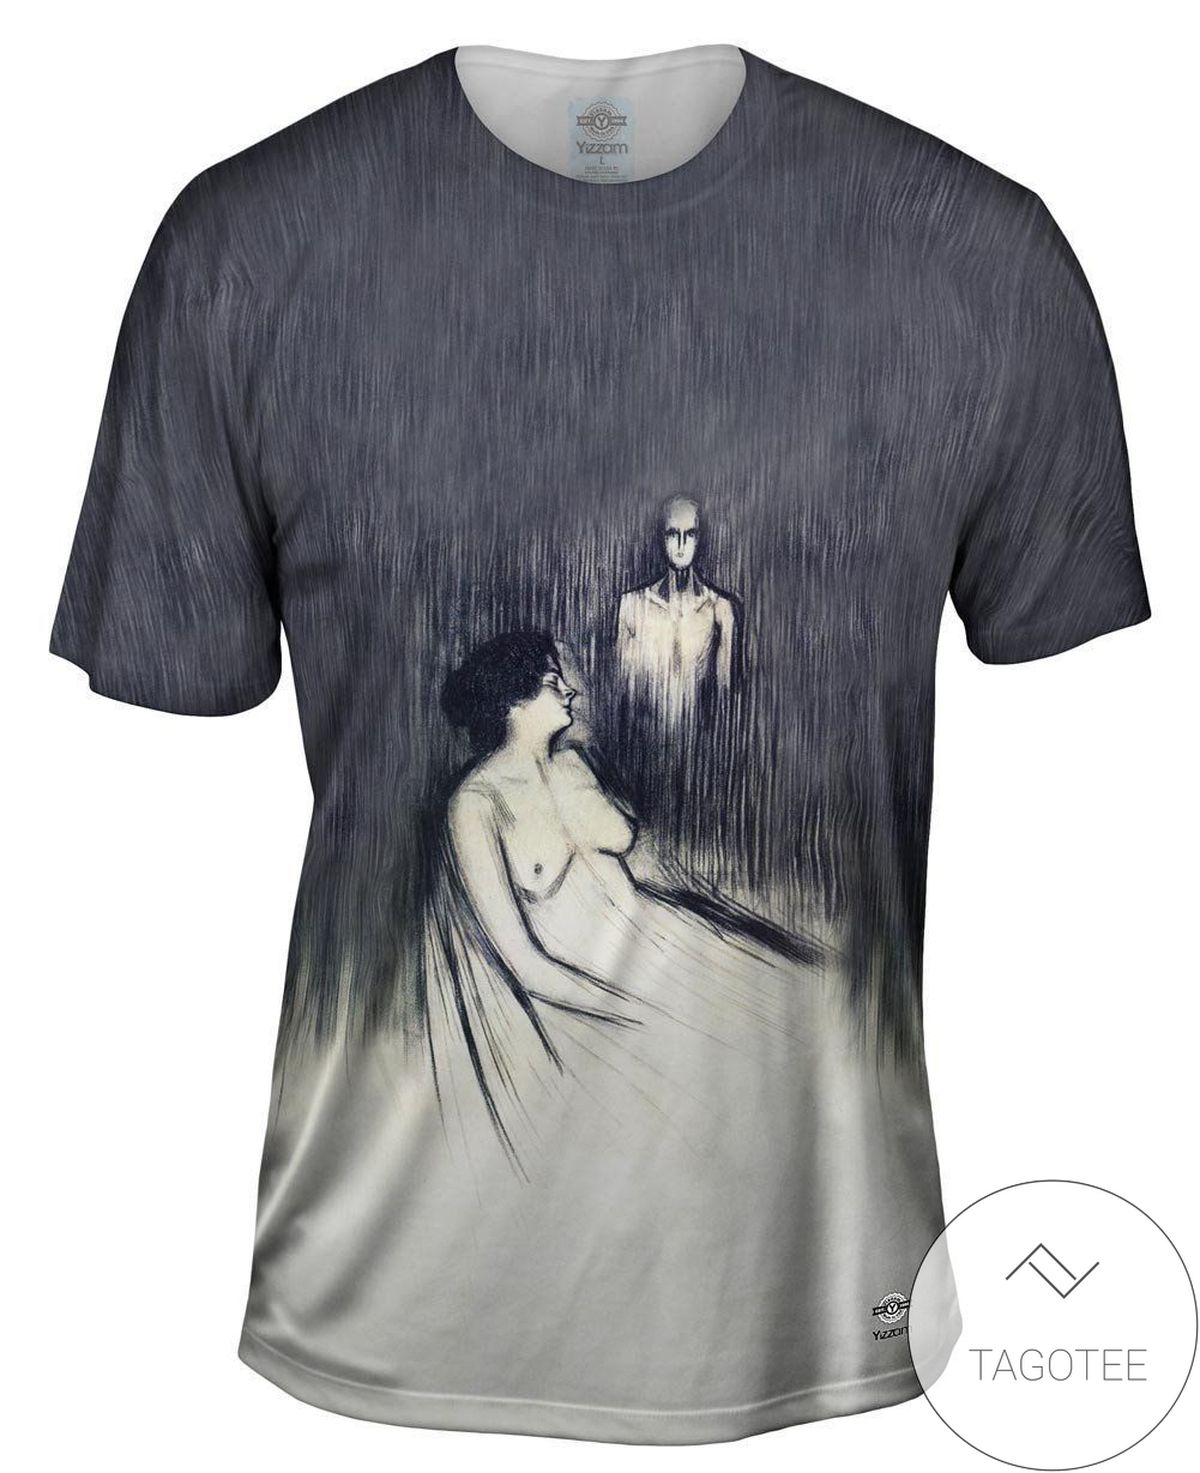 Top Rated Pablo Picasso – The Cries Of Virgins (1990) Mens All Over Print T-shirt